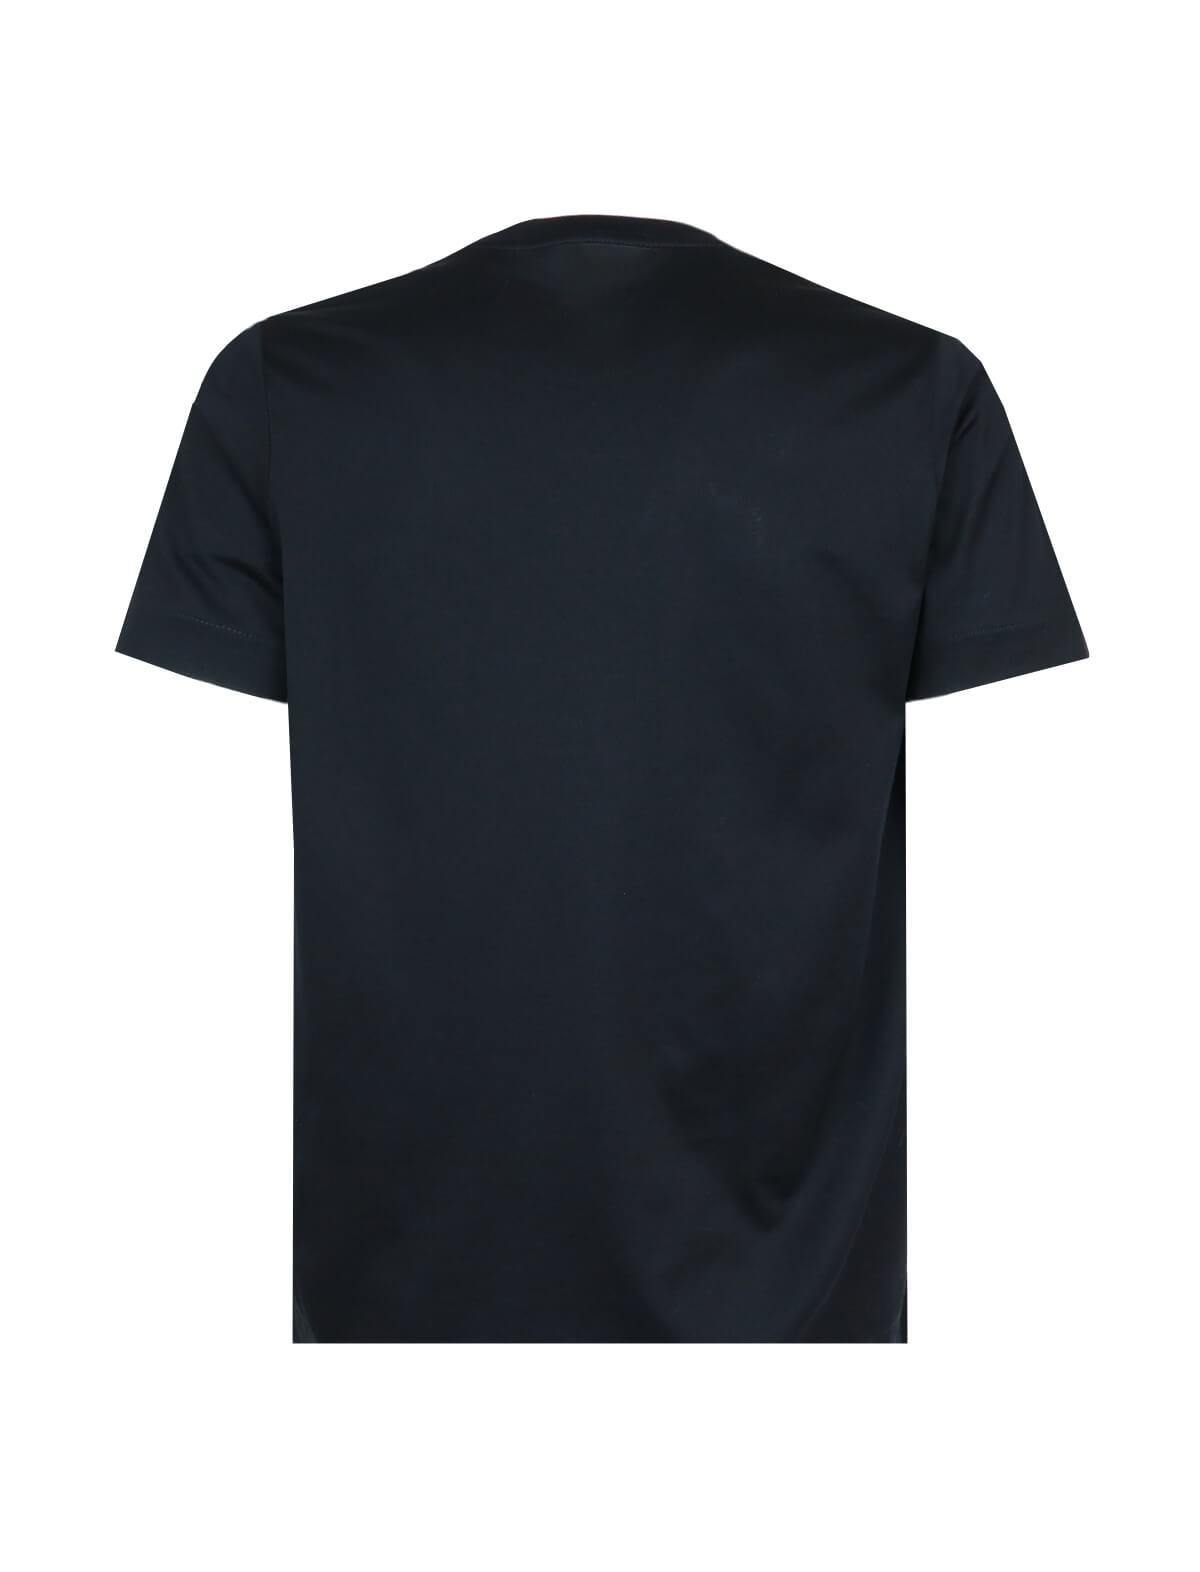 CIRCOLO 1901 Cotton T-Shirt with Front Pocket in Black | CLOSET Singapore